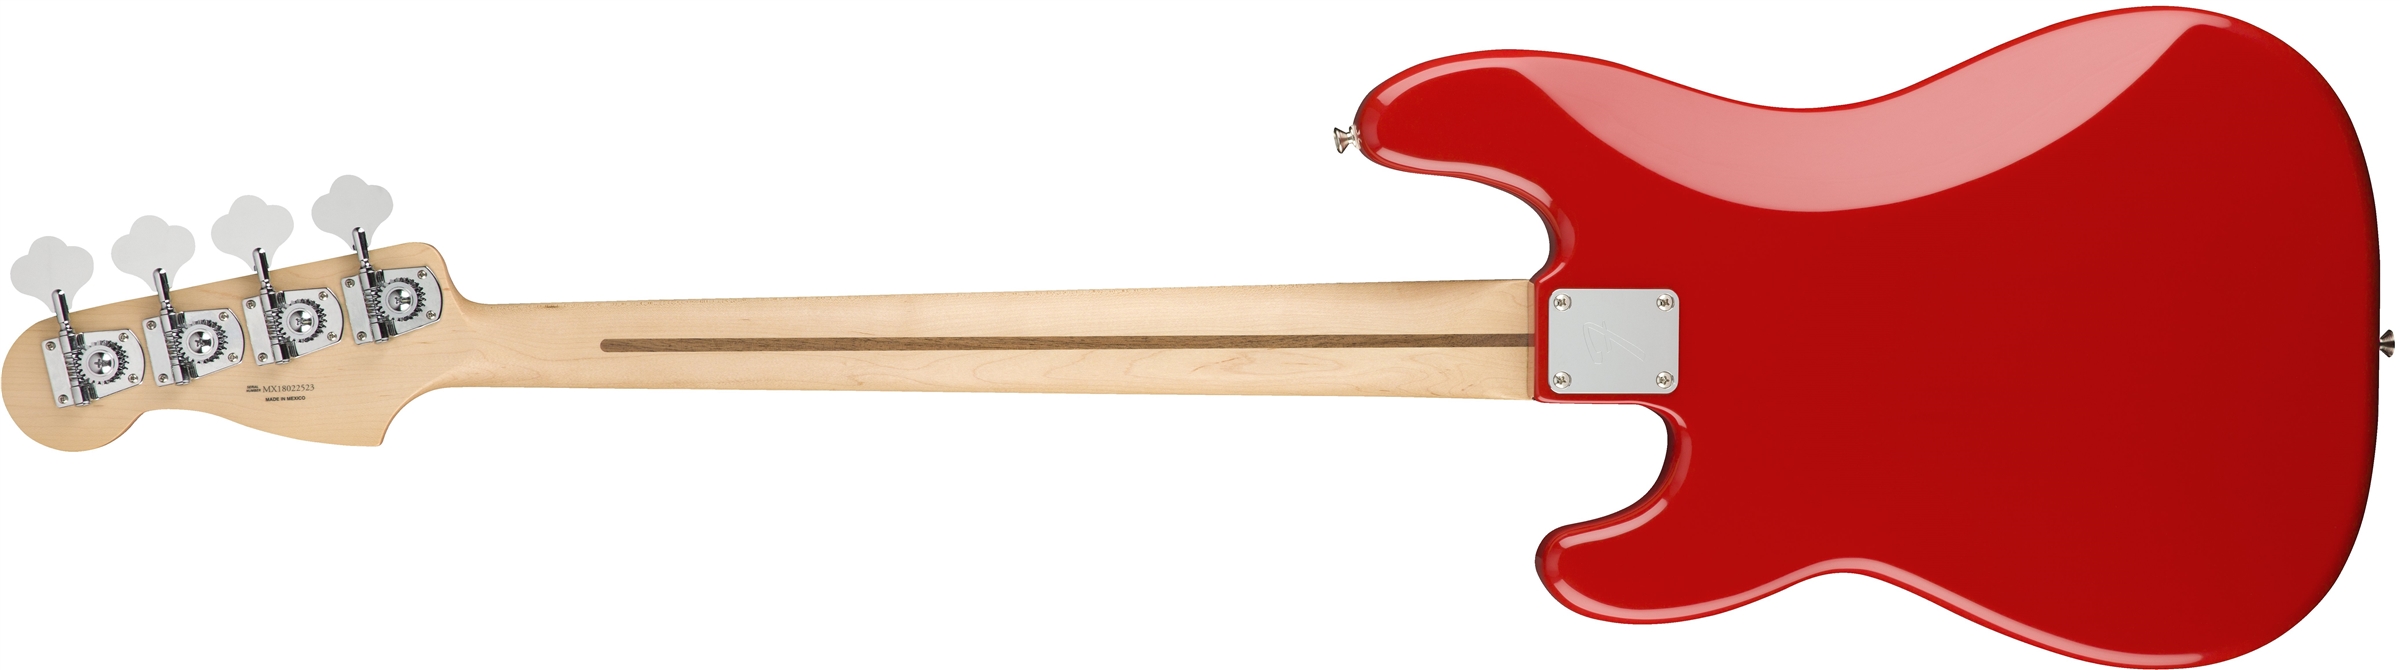 Fender Precision Bass Player Mex Pf - Sonic Red - Basse Électrique Solid Body - Variation 1